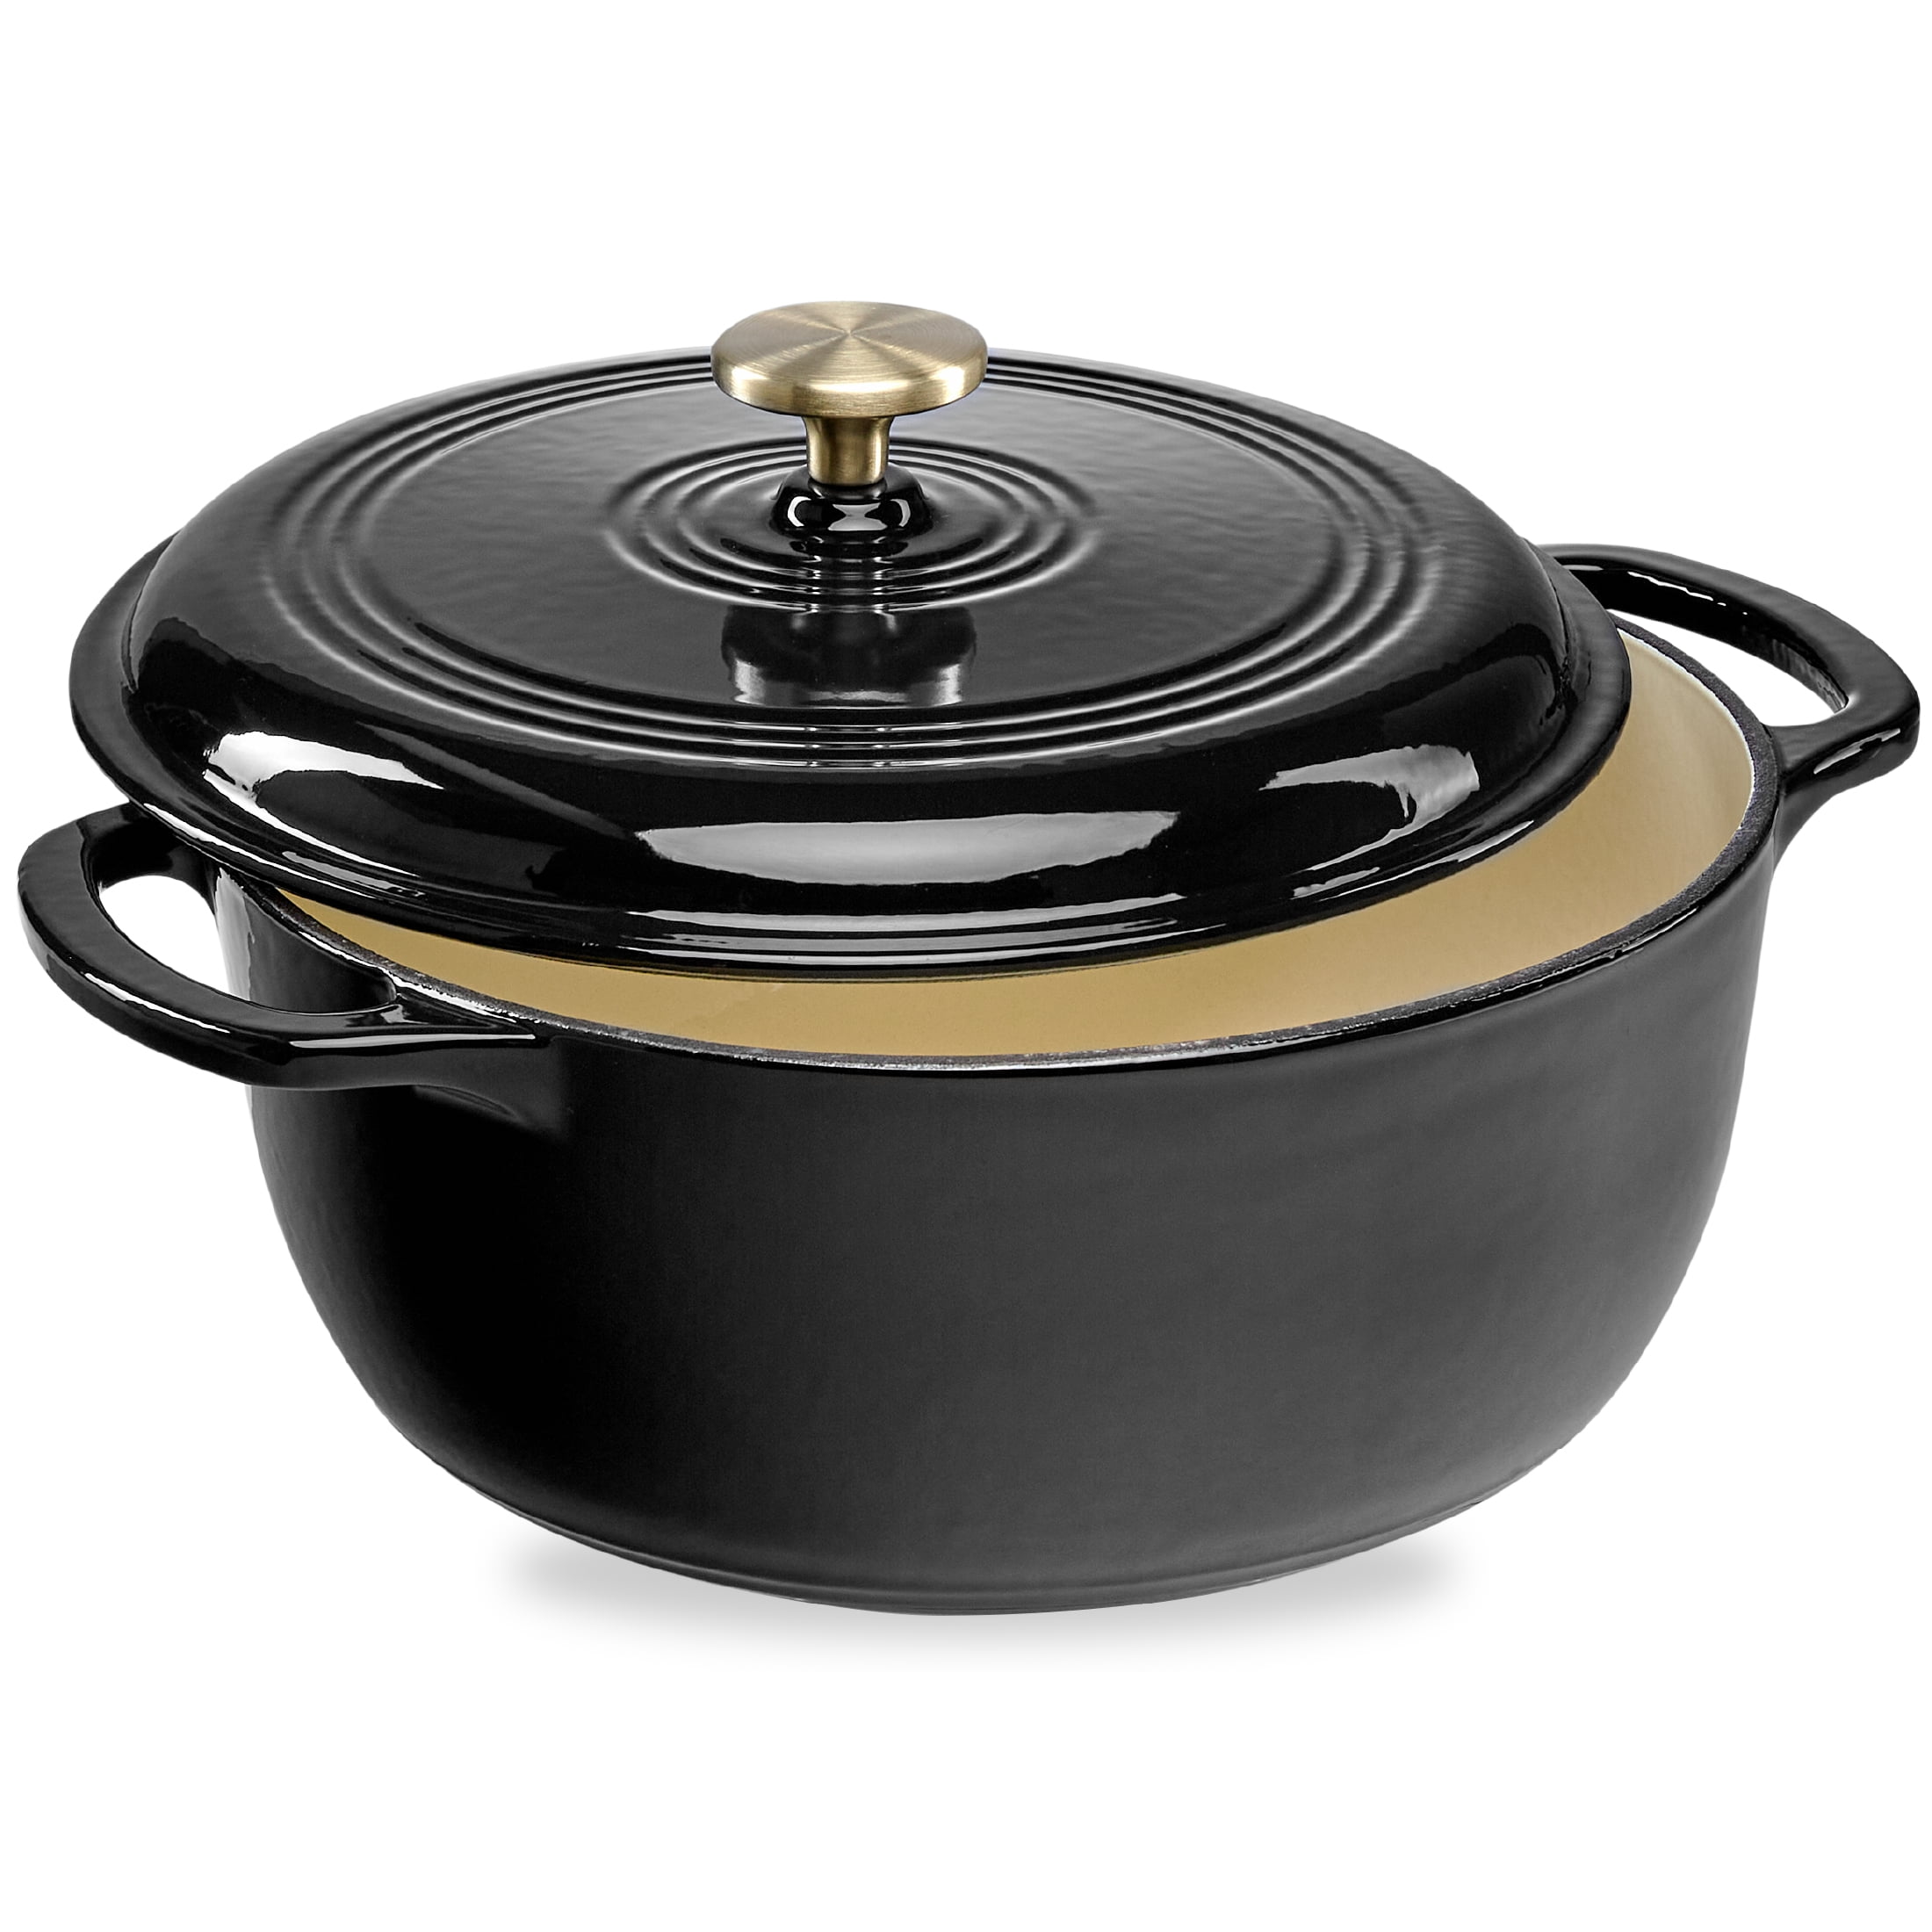 Skyriper 6 Quart Dutch Oven Pot with Lid Non-Stick Enameled Cast Iron Dutch  Oven for Bread Baking, Roasting & Braising, Deep Round Heavy-duty Casserole  Dish, Compatible with all Cooktops & Ovens, Red